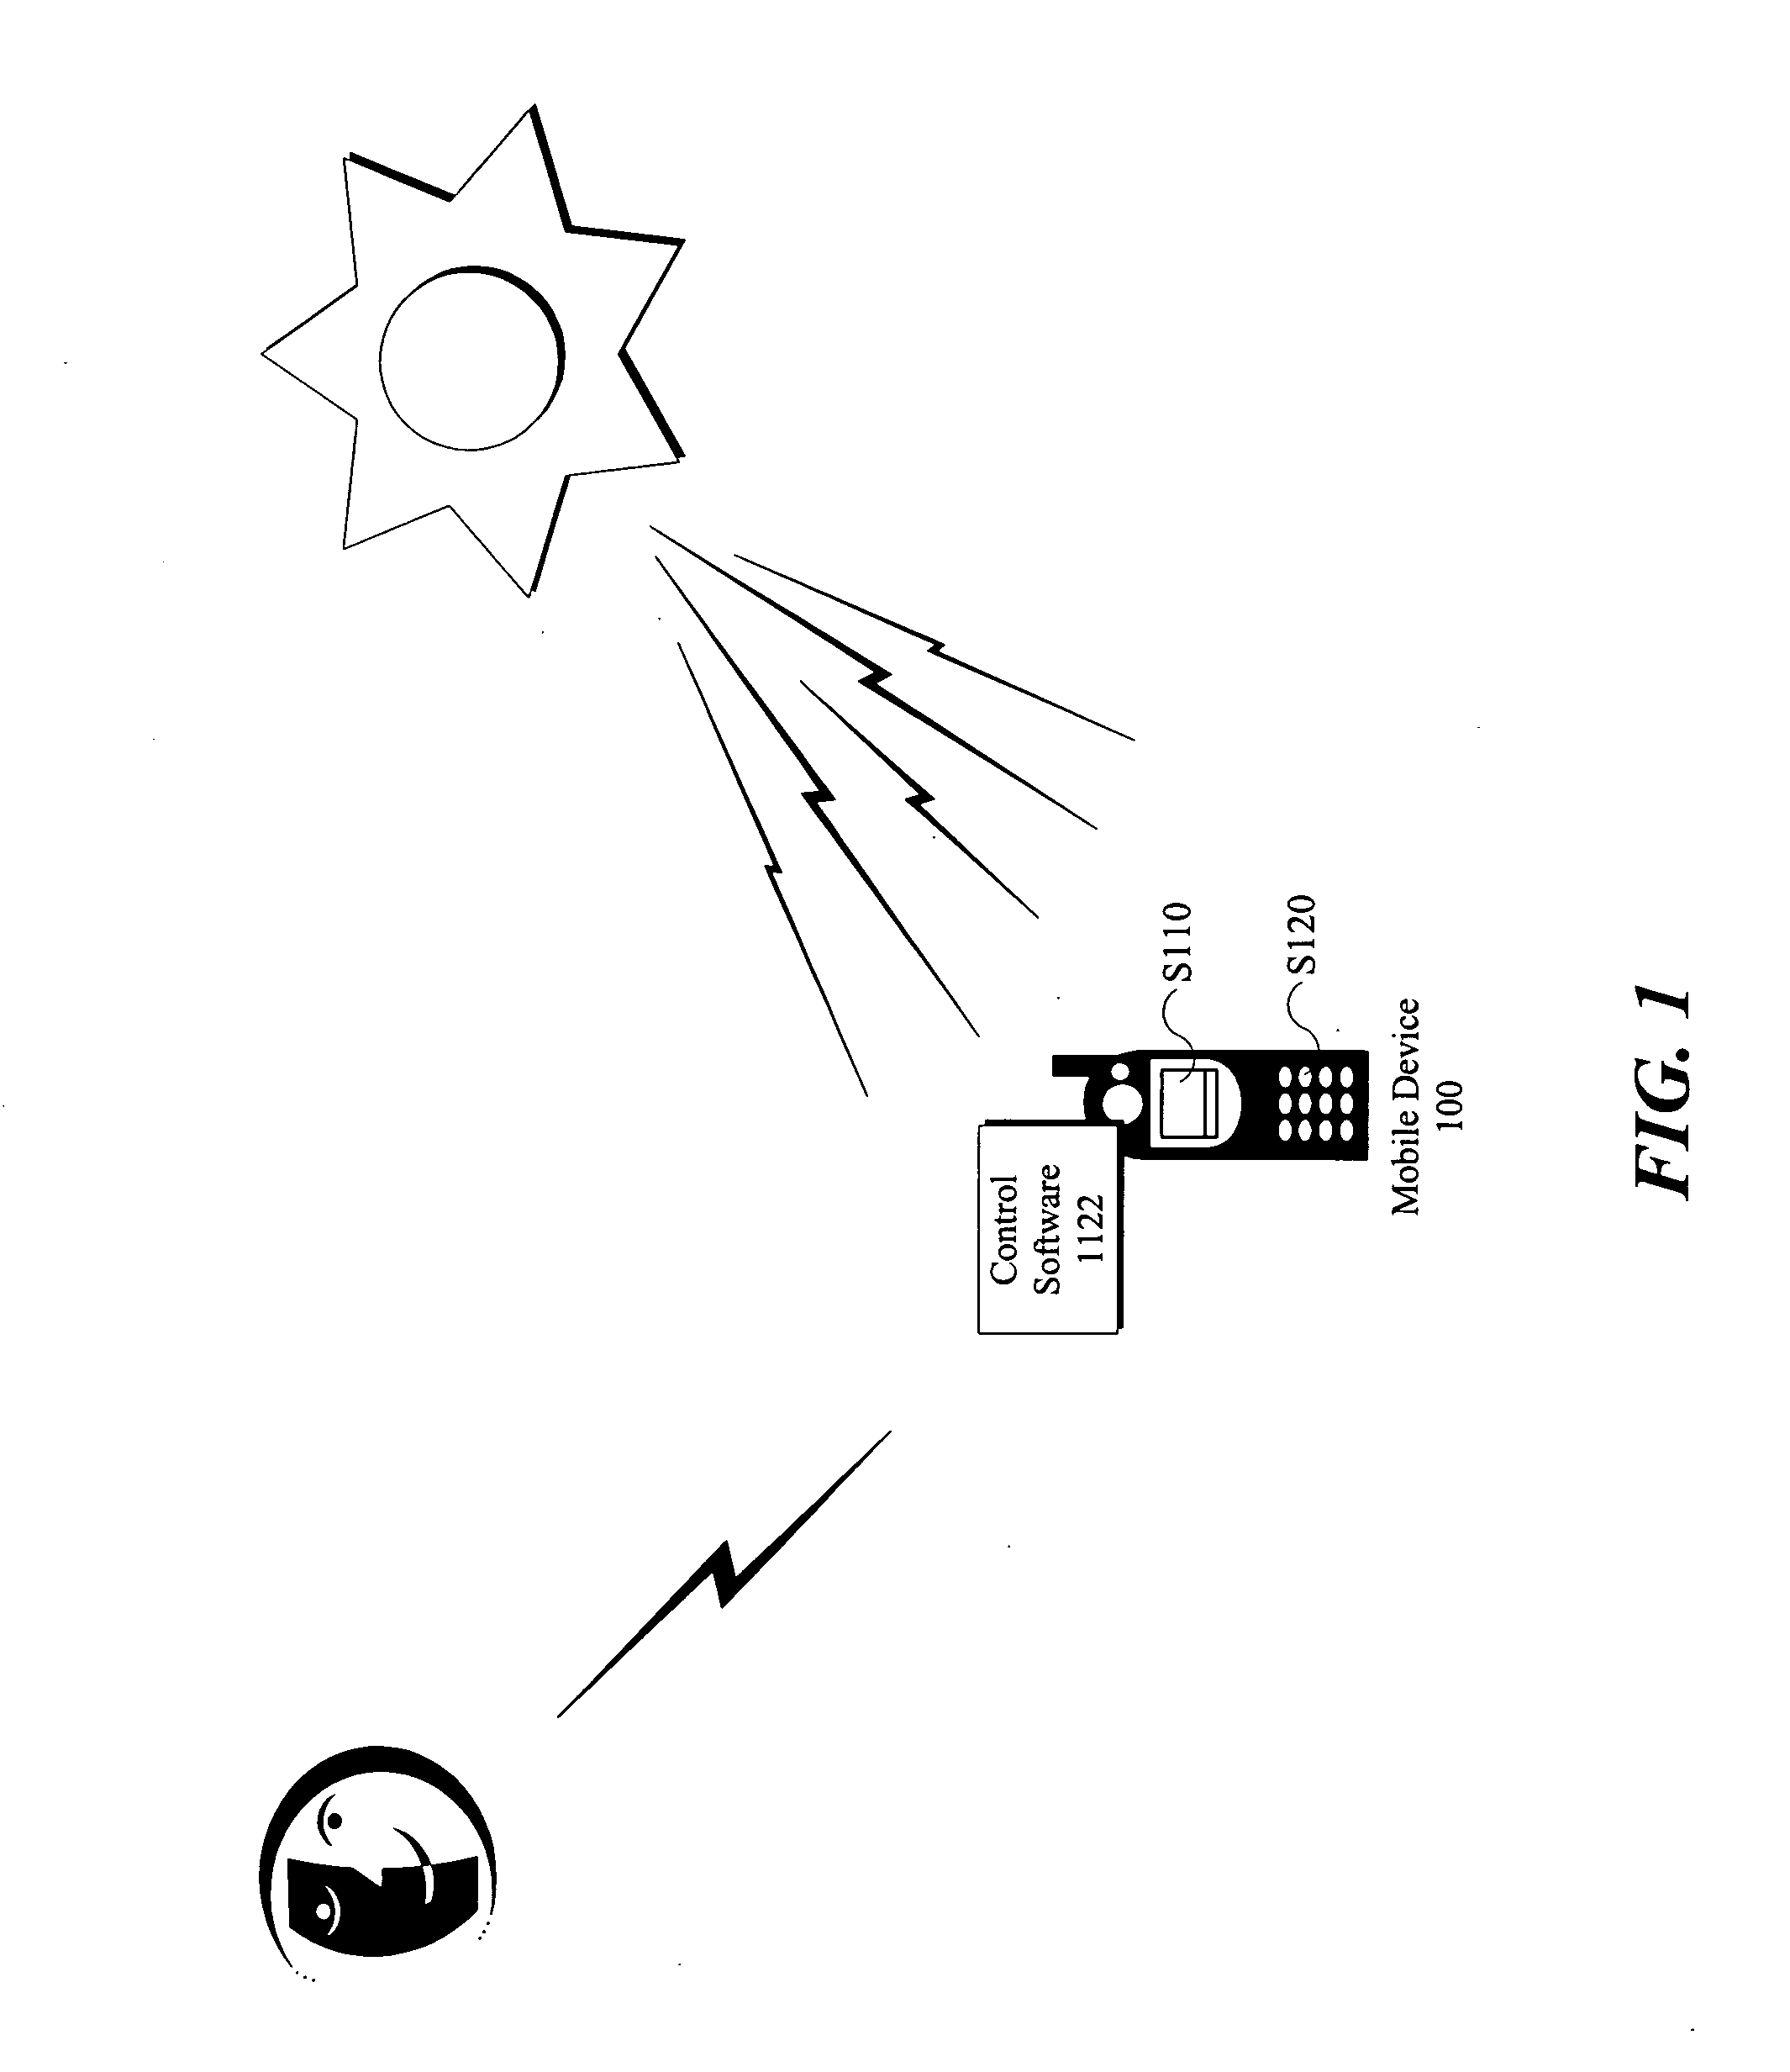 Illumination system and method for a mobile computing device